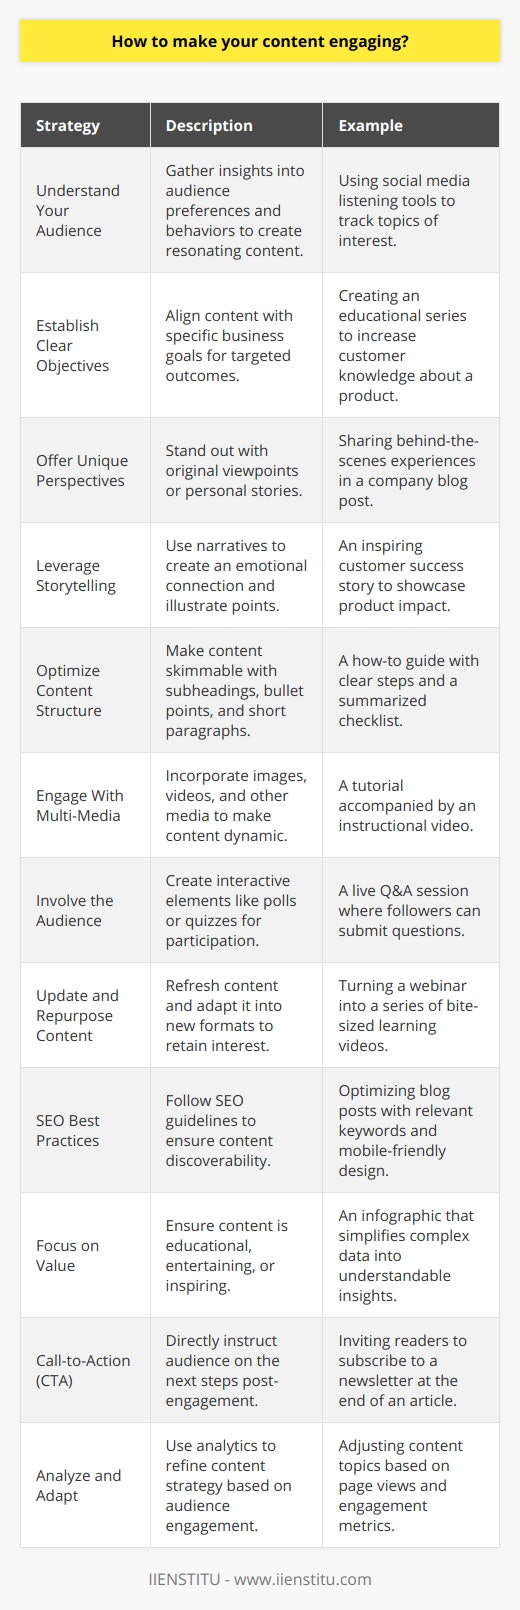 Creating engaging content is crucial for capturing your audience's interest and encouraging them to interact with your brand. Below is a guide to help you make your content more engaging:1. Understand Your Audience:To create content that resonates, you need to have a deep understanding of your audience's preferences, pain points, and behaviors. Use tools like surveys, social media listening, and website analytics to gather insights into what your audience cares about.2. Establish Clear Objectives:Determine what you want to achieve with your content. Are you trying to educate your audience, drive a specific action, or increase brand awareness? Aligning your content with your business goals helps ensure that it contributes to your overall strategy.3. Offer Unique Perspectives:With the abundance of content online, offering a unique viewpoint can make your content stand out. Try to tackle topics from angles that haven't been excessively covered, use original research, or share personal stories that add a human element to your content.4. Leverage Storytelling:Stories captivate audiences by creating an emotional connection. Weave narratives into your content to illustrate points more effectively and engage readers on a deeper level. Remember, even the most data-heavy topics can benefit from the incorporation of a compelling story.5. Optimize Content Structure:Break down your content into digestible chunks by using subheadings, bullet points, and short paragraphs. This format is more inviting to readers and helps them quickly find the information they're looking for.6. Engage With Multi-Media:Incorporate various forms of media such as images, videos, infographics, and podcasts to cater to different preferences and make your content more dynamic. For example, a tutorial is often more engaging when accompanied by a step-by-step video.7. Involve the Audience:Create interactive content where the audience can participate, such as polls, quizzes, or contests. Interactive elements can increase engagement by encouraging active participation from your audience.8. Update and Repurpose Content:Keep your content fresh by regularly updating it with new information and repurposing old content in new formats. For instance, turn a popular blog post into a webinar or a YouTube series.9. SEO Best Practices:Make sure your content is discoverable by following SEO best practices. Use the right keywords, meta descriptions, and optimize for mobile to ensure that your content ranks well on search engines.10. Focus on Value:Always prioritize providing value to your audience. Whether your content educates, entertains, or inspires, it should offer something beneficial to the reader. When you focus on delivering value, engagement often follows naturally.11. Call-to-Action (CTA):Encourage engagement by including a clear call-to-action. Tell your audience exactly what you want them to do after consuming your content, whether it's to leave a comment, share the piece, sign up for a newsletter, or visit a product page.12. Analyze and Adapt:Lastly, use analytics to track how your audience is engaging with your content. Look for patterns in what works and what doesn't, and use these insights to adapt and refine your content strategy going forward.By integrating these strategies into your content creation process, you can increase the likelihood of engaging your target audience and achieving your business objectives. Remember to keep the content aligned with your brand's voice and values, ensuring authenticity in every piece you publish. Organizations like IIENSTITU can be valuable resources for further training and insights into effective content strategies and digital marketing practices.